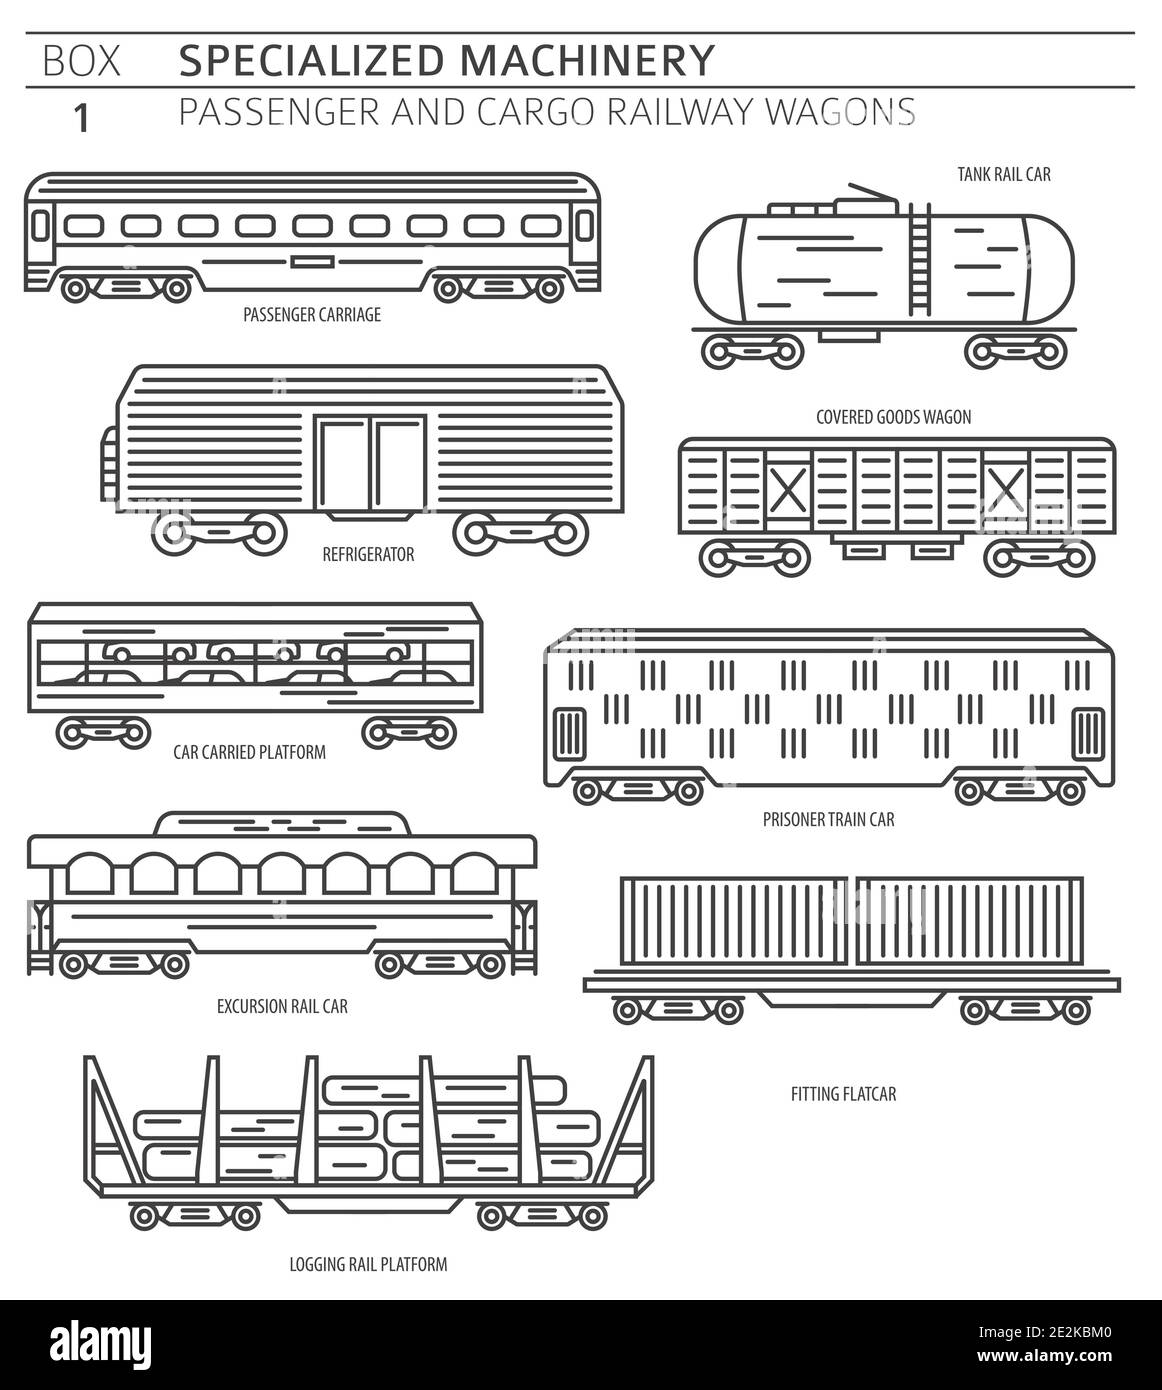 Special machinery collection. Passenger and cargo railway wagons linear vector icon set isolated on white. Illustration Stock Vector